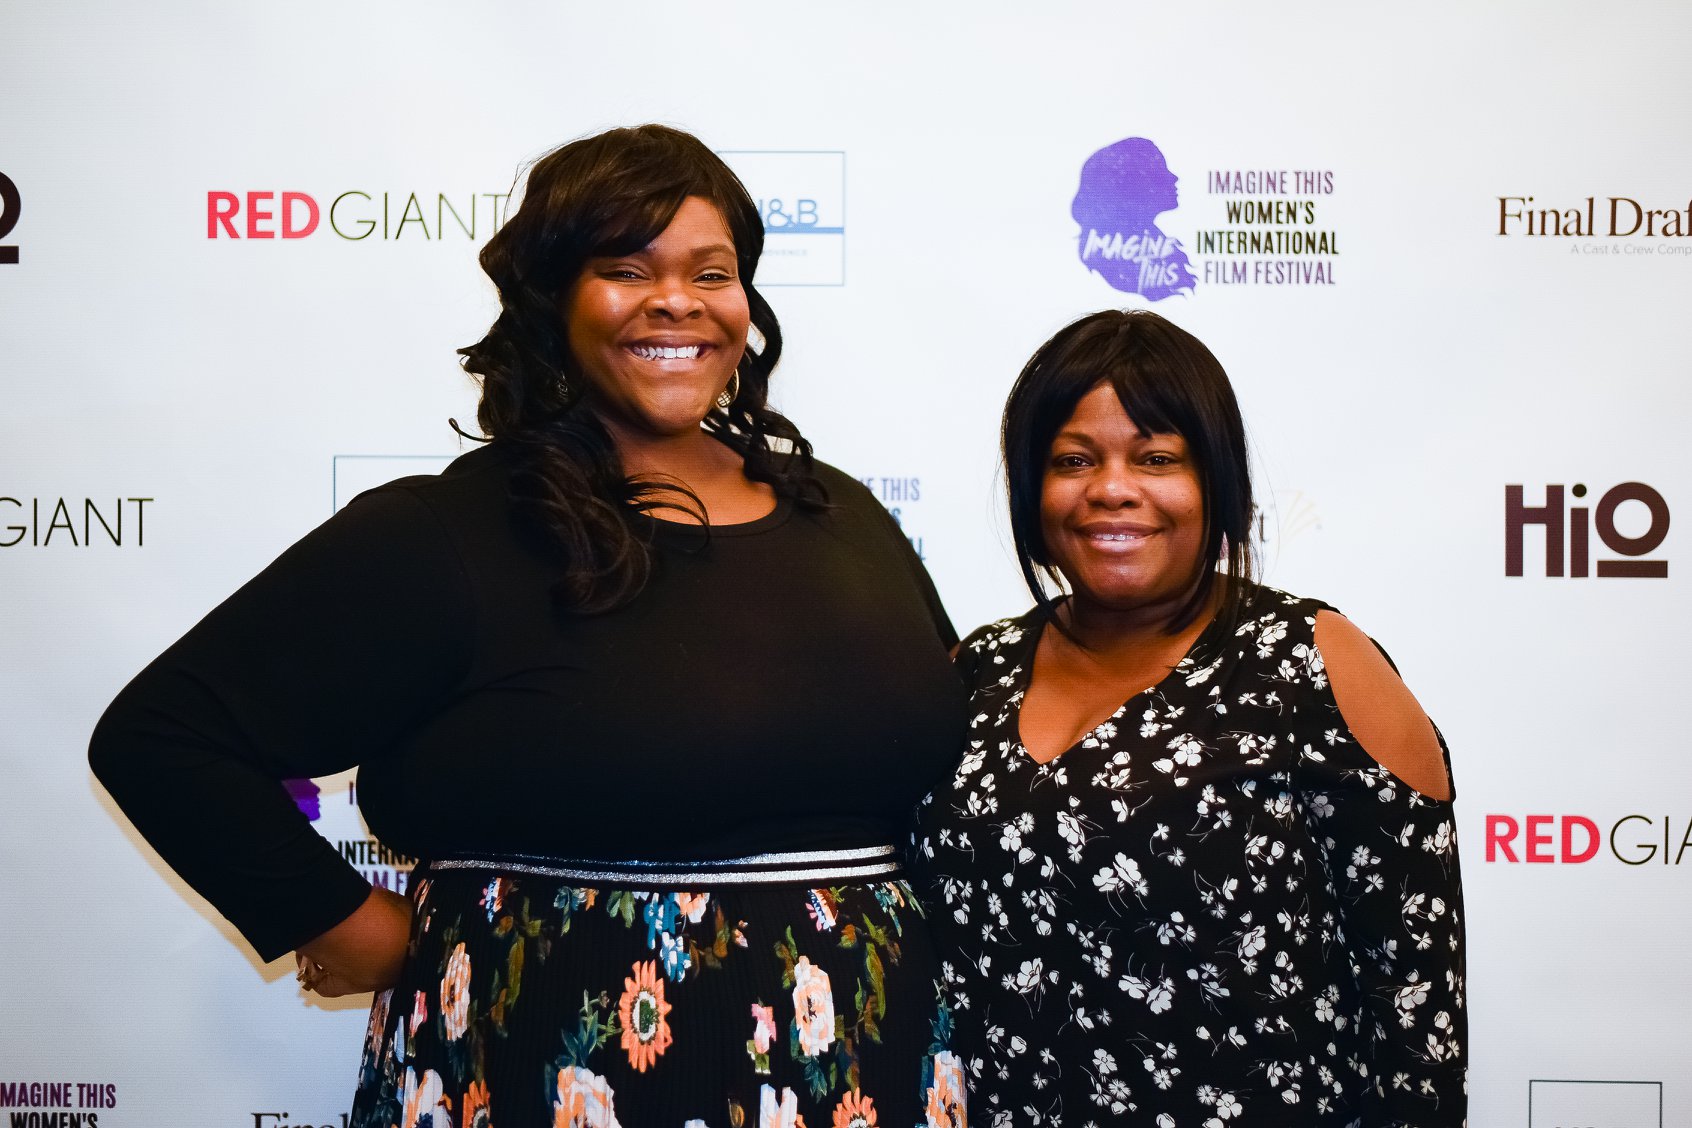 Organizers (L) Patrice Francois and (R) Susie Francois created the Imagine This Women's International Film Festival to amplify and empower independent and aspiring womxn filmmakers.